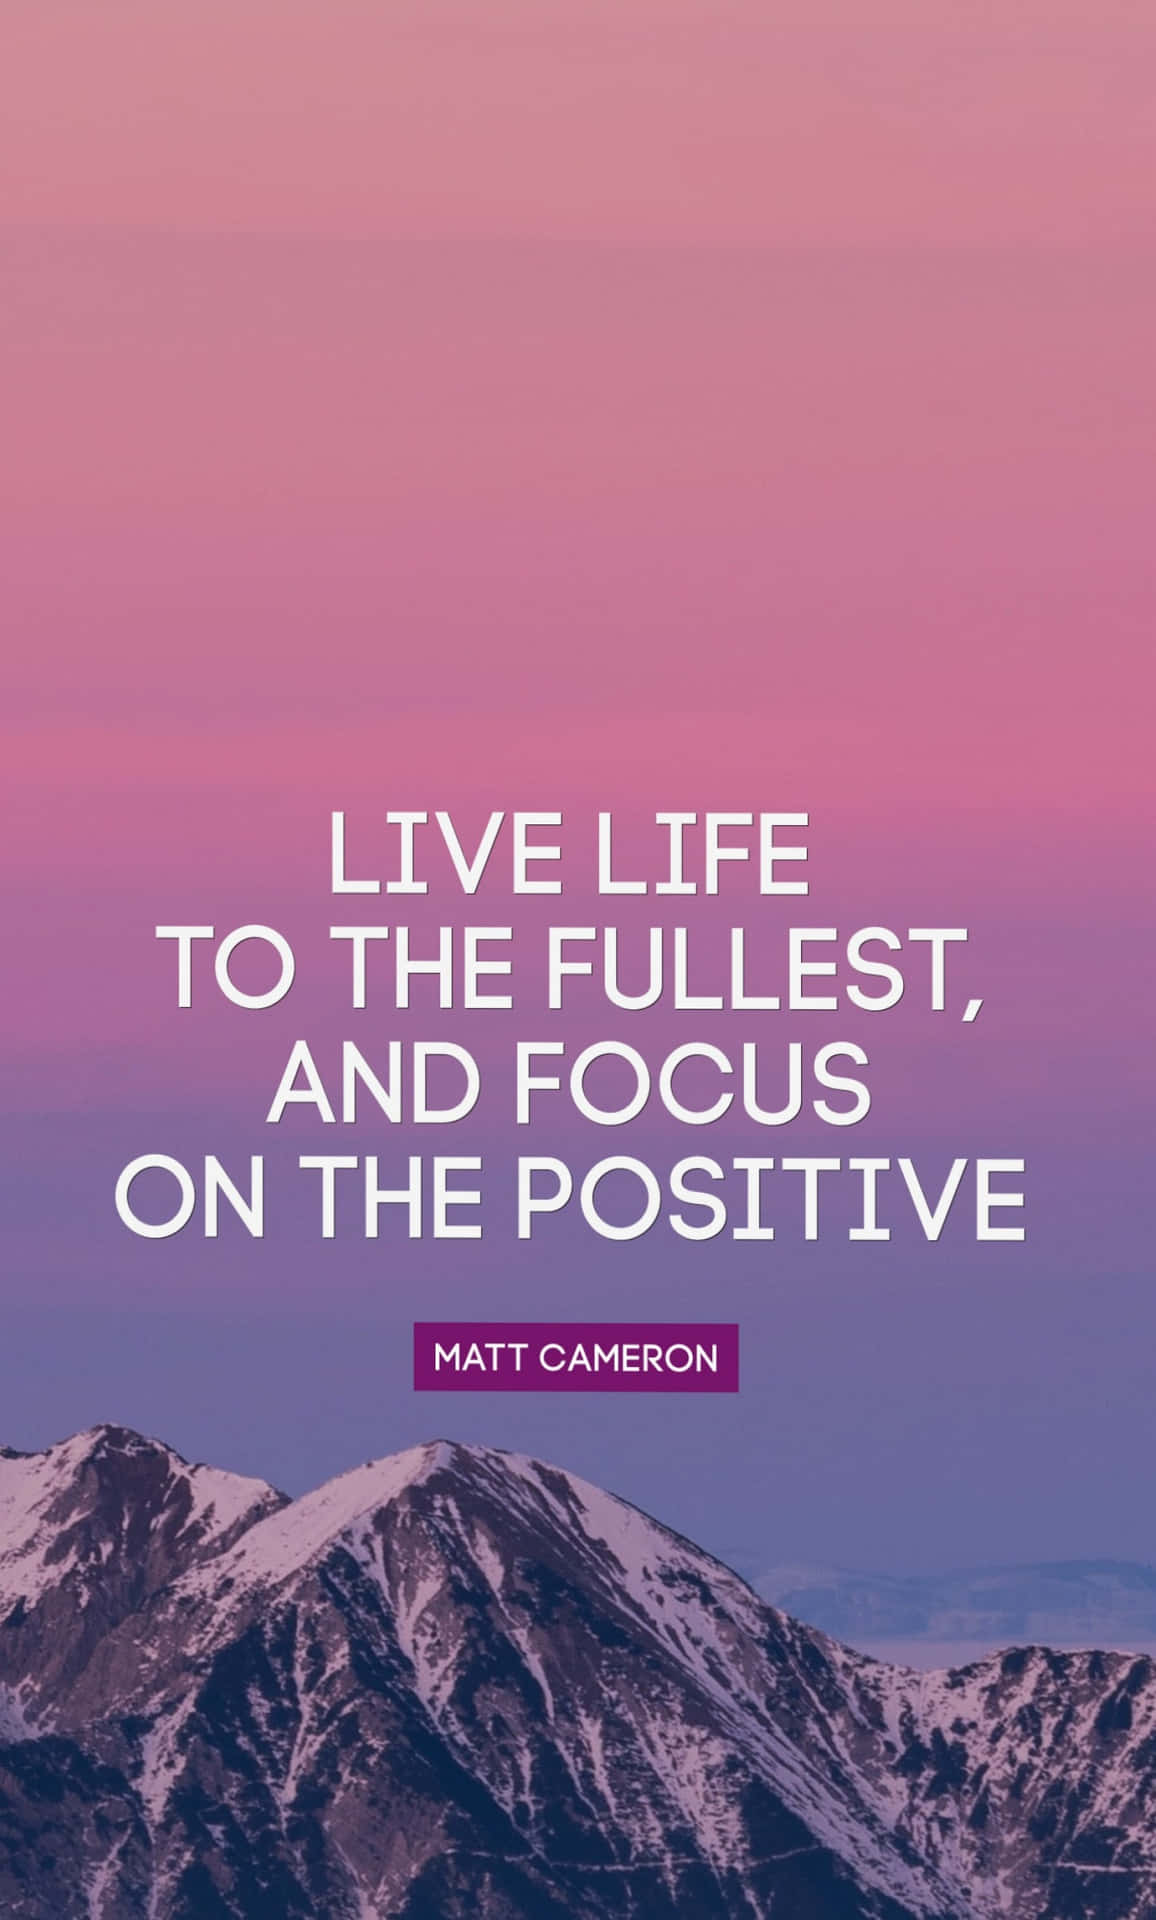 Live Life To The Fullest, And Focus On The Positive